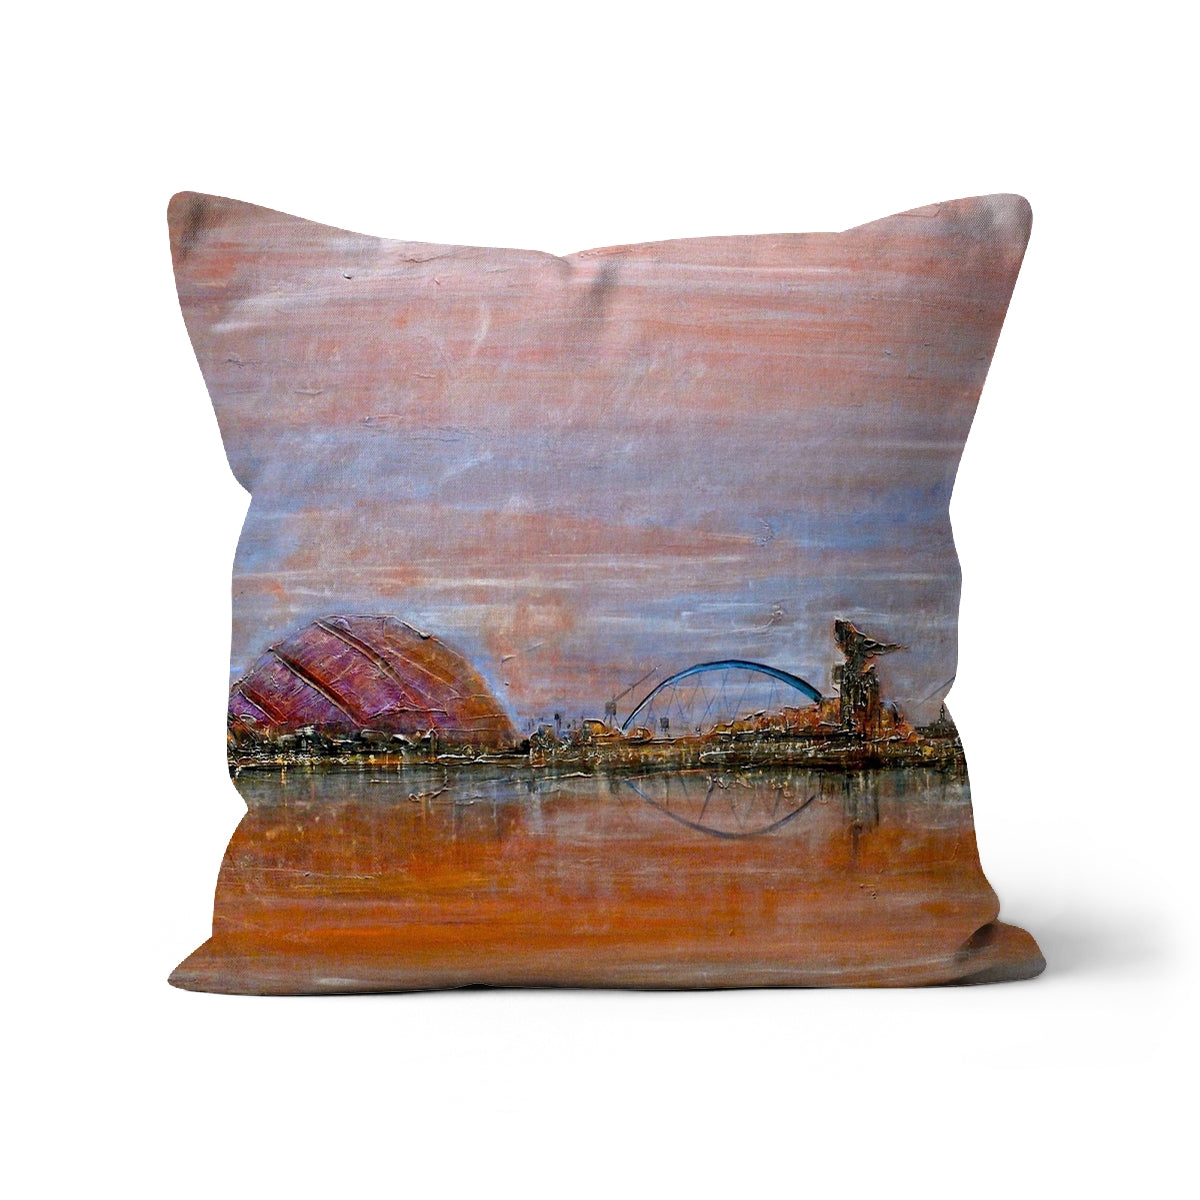 Glasgow Harbour Art Gifts Cushion-Cushions-Edinburgh & Glasgow Art Gallery-Canvas-24"x24"-Paintings, Prints, Homeware, Art Gifts From Scotland By Scottish Artist Kevin Hunter